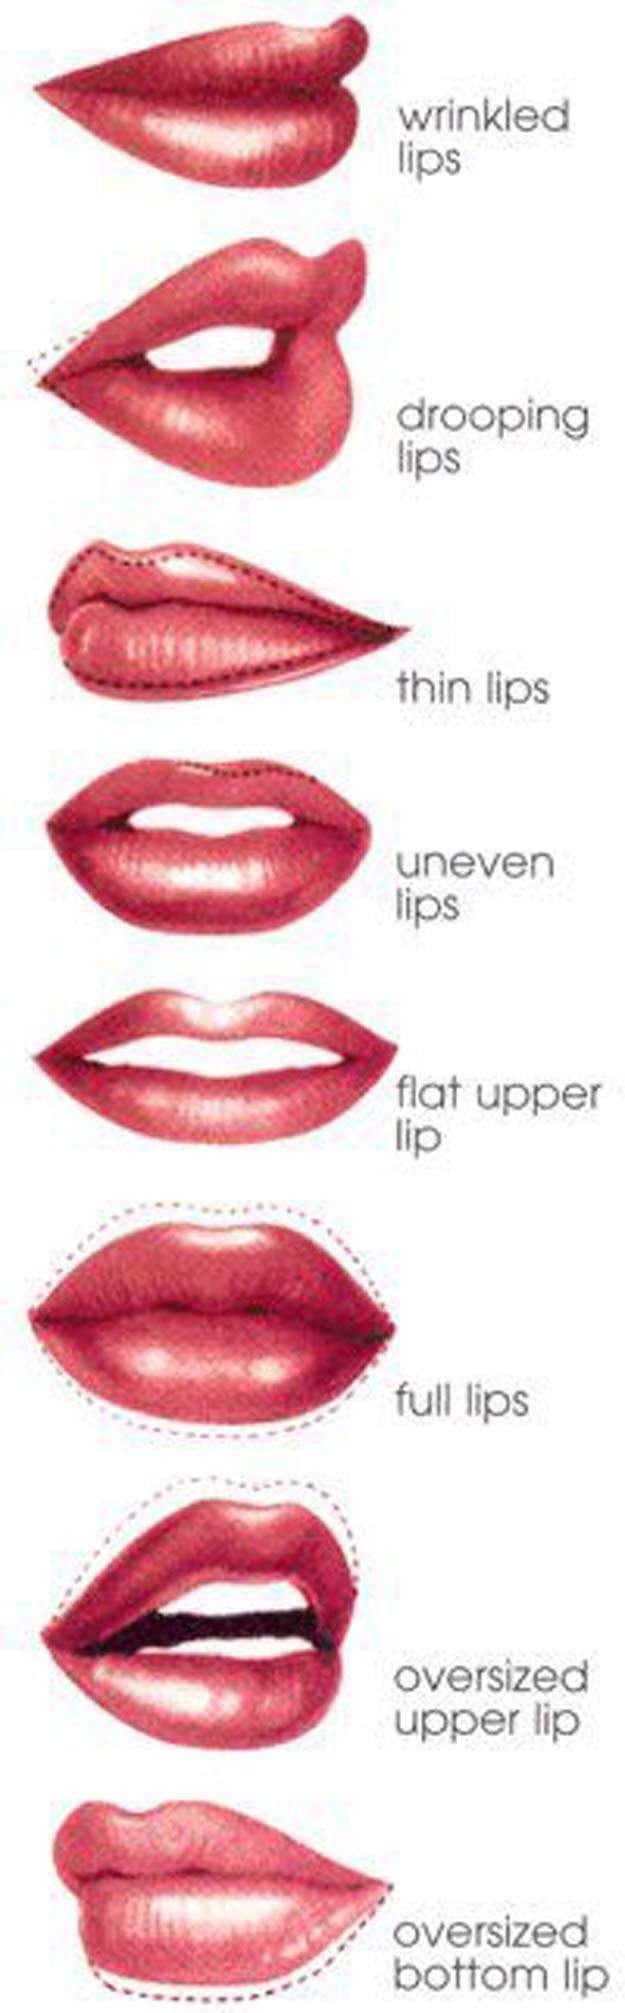 Lipstick Tutorials - Best Step by Step Makeup Tutorial How To - Make up tips-Lips-Lip Tips - Easy and Quick Ways to Apply Lipstick and Awesome Beauty Ideas - Cool Ideas for Teen Makeup for School, Party and Special Occasion - Makeup Tutorials for Beginners - Lip Liner Tips and Tricks to Add Volume, DIY Lip Techniques for Fuller Lips - DIY Projects and Crafts for Teens 